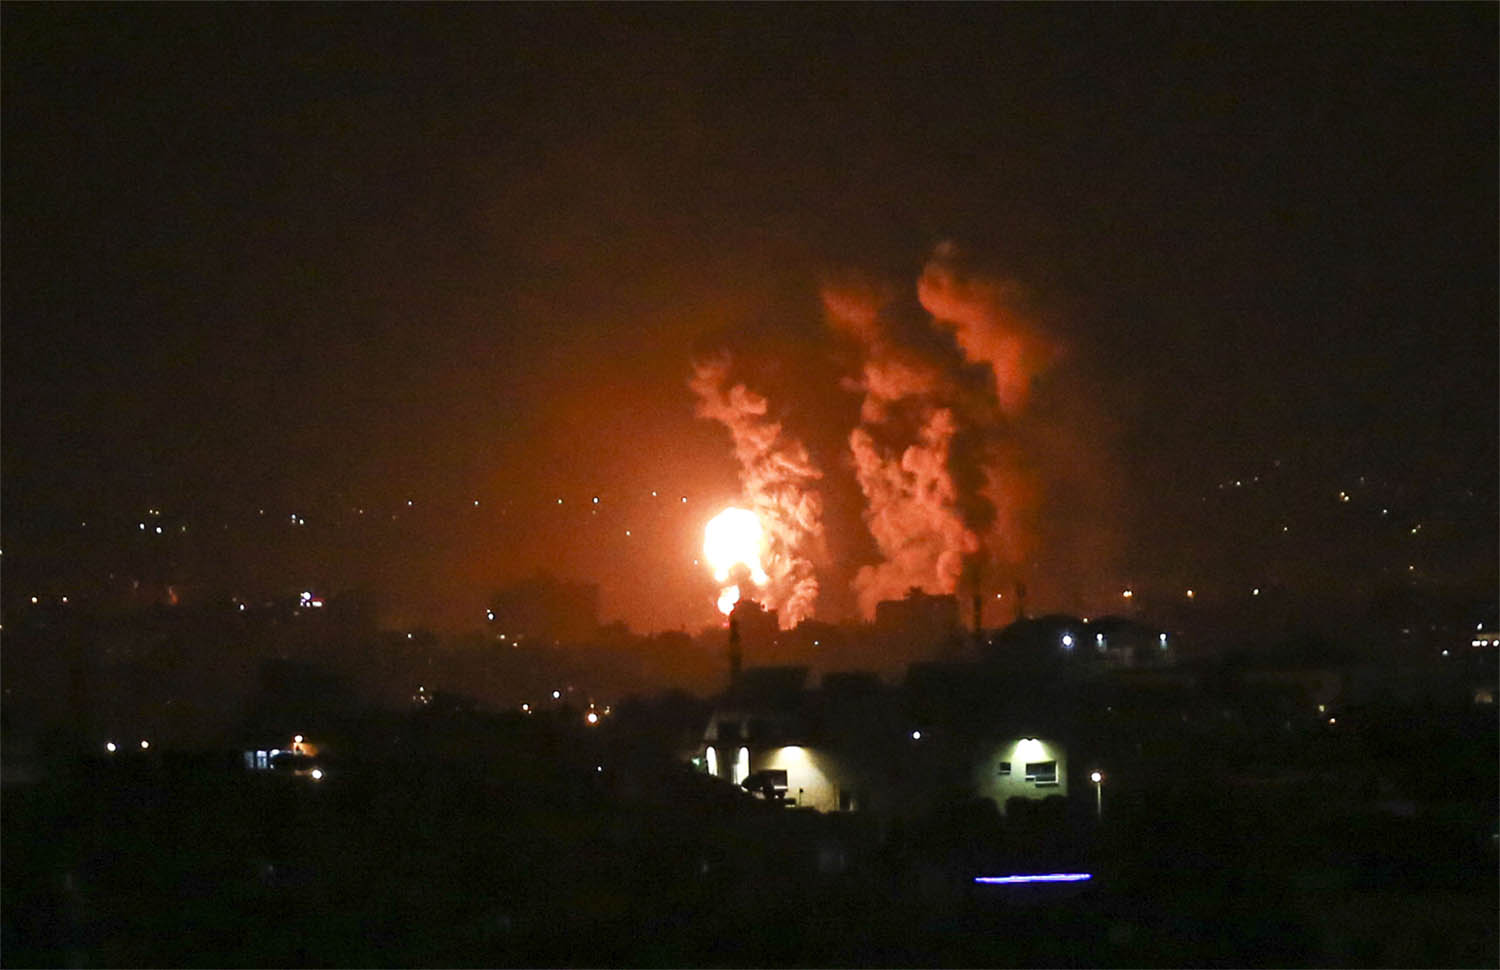 Israel says its planes attacked another Hamas compound after an anti-aircraft missile was fired from Gaza